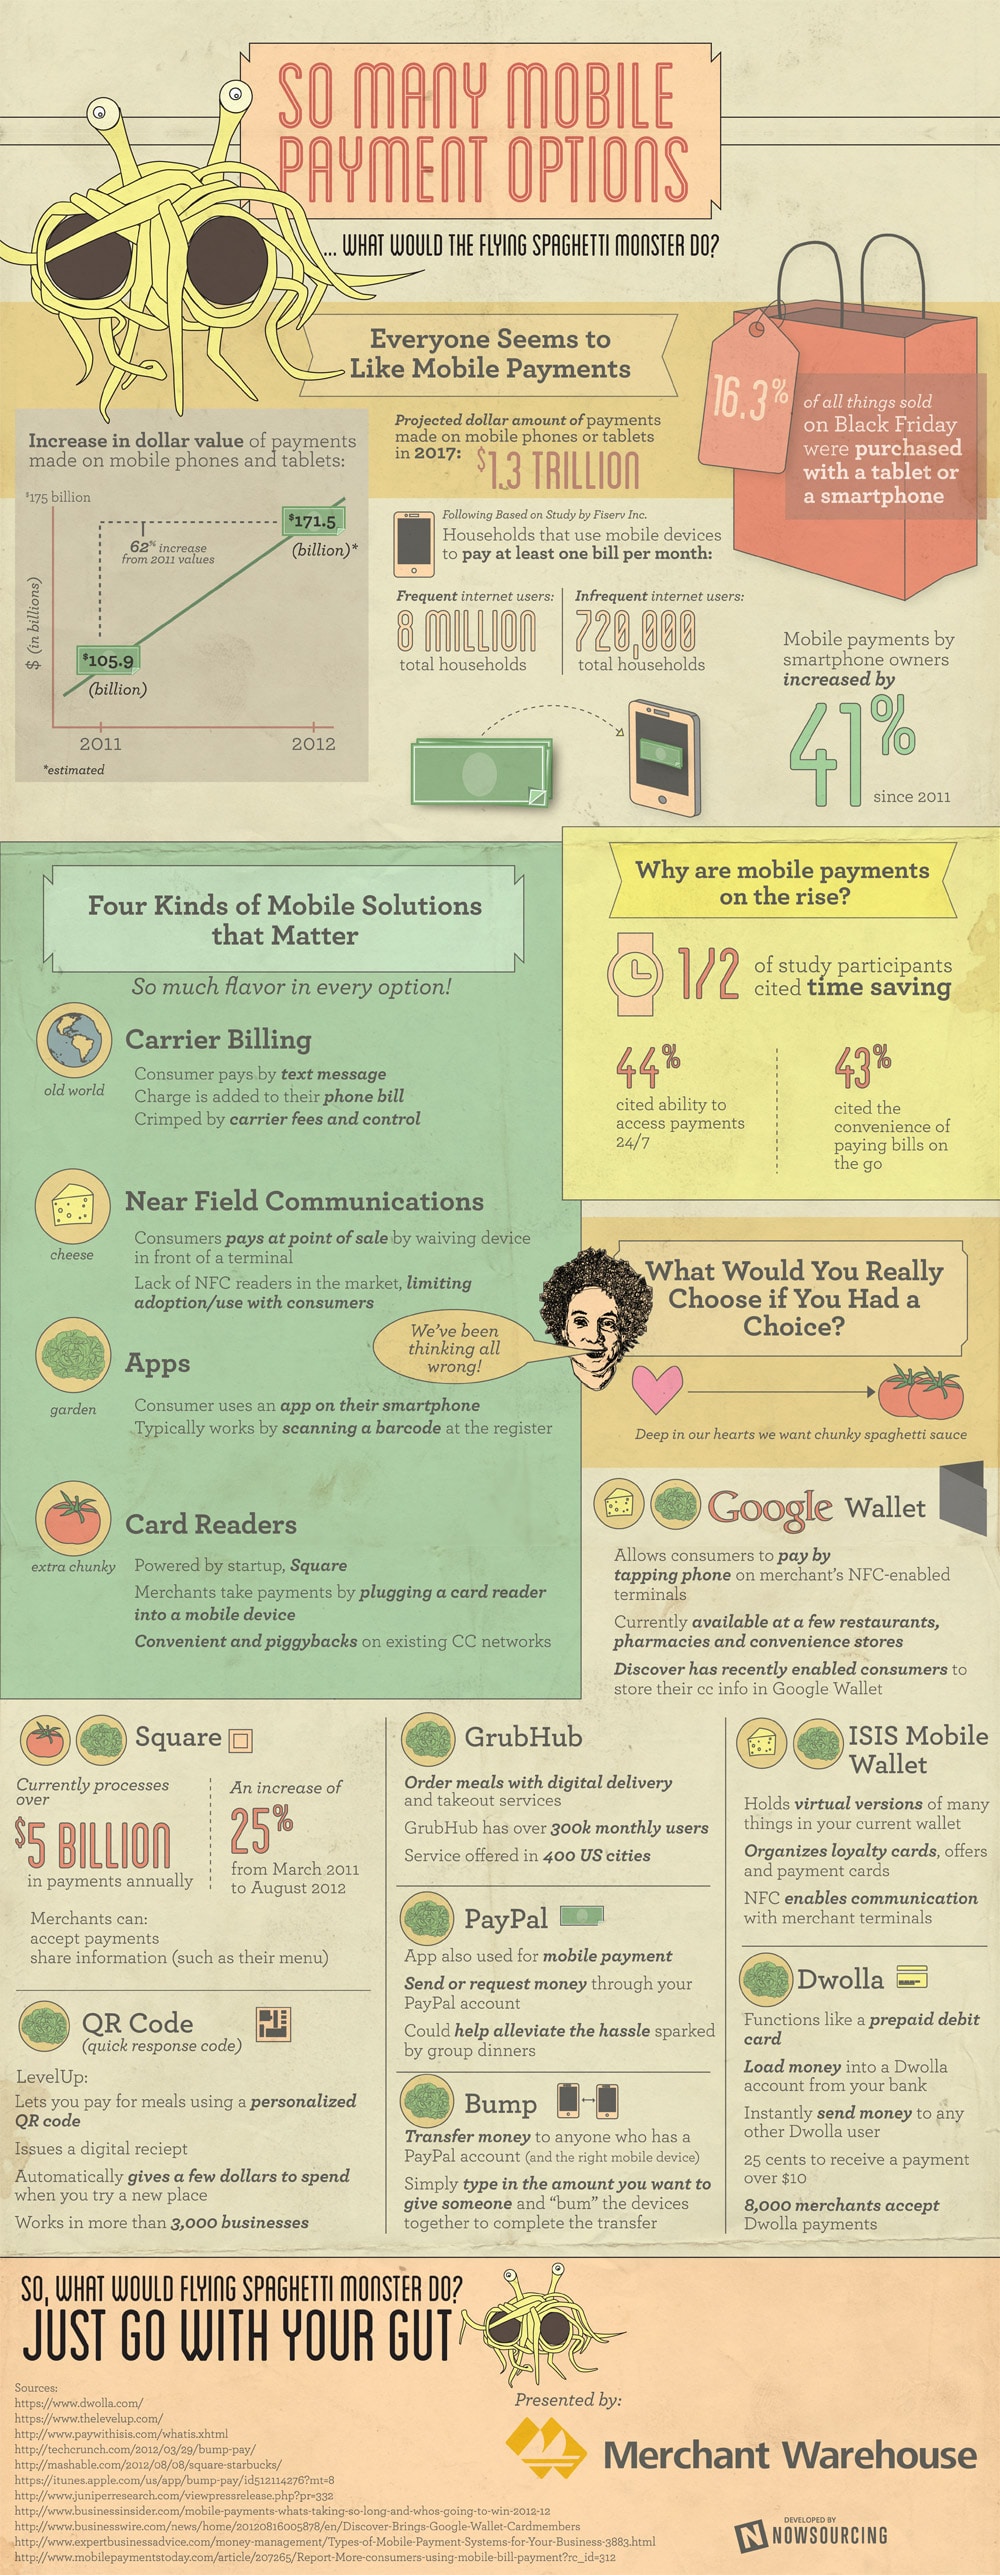 Compared Mobile Payment Options For Merchants/Consumers [Infographic]